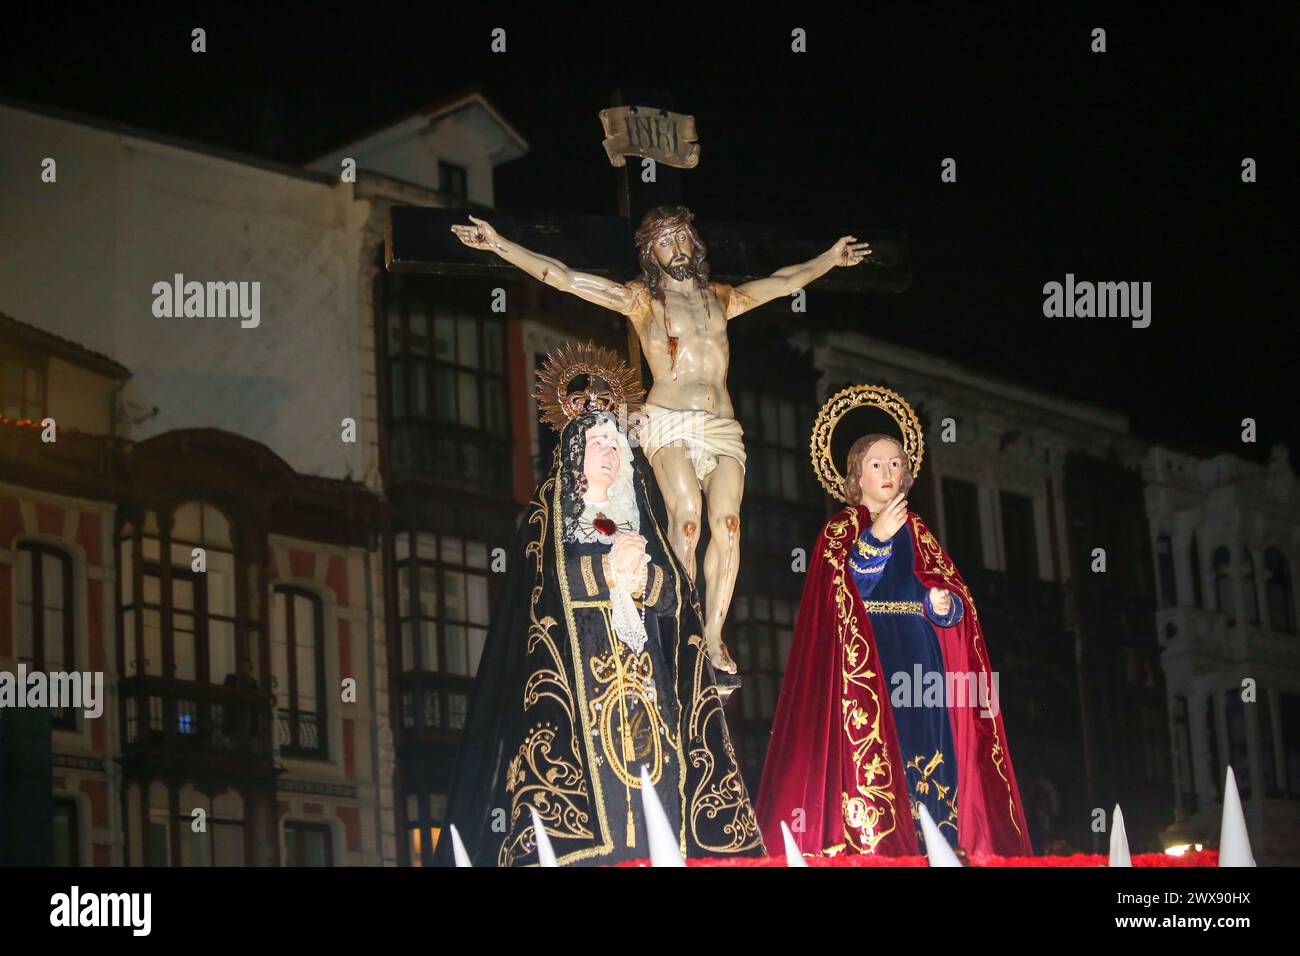 Aviles, Spain, March 28th, 2024: The passing of the 'Third Word' during the Procession of Silence, on March 28, 2024, in Aviles, Spain. Credit: Alberto Brevers / Alamy Live News. Stock Photo